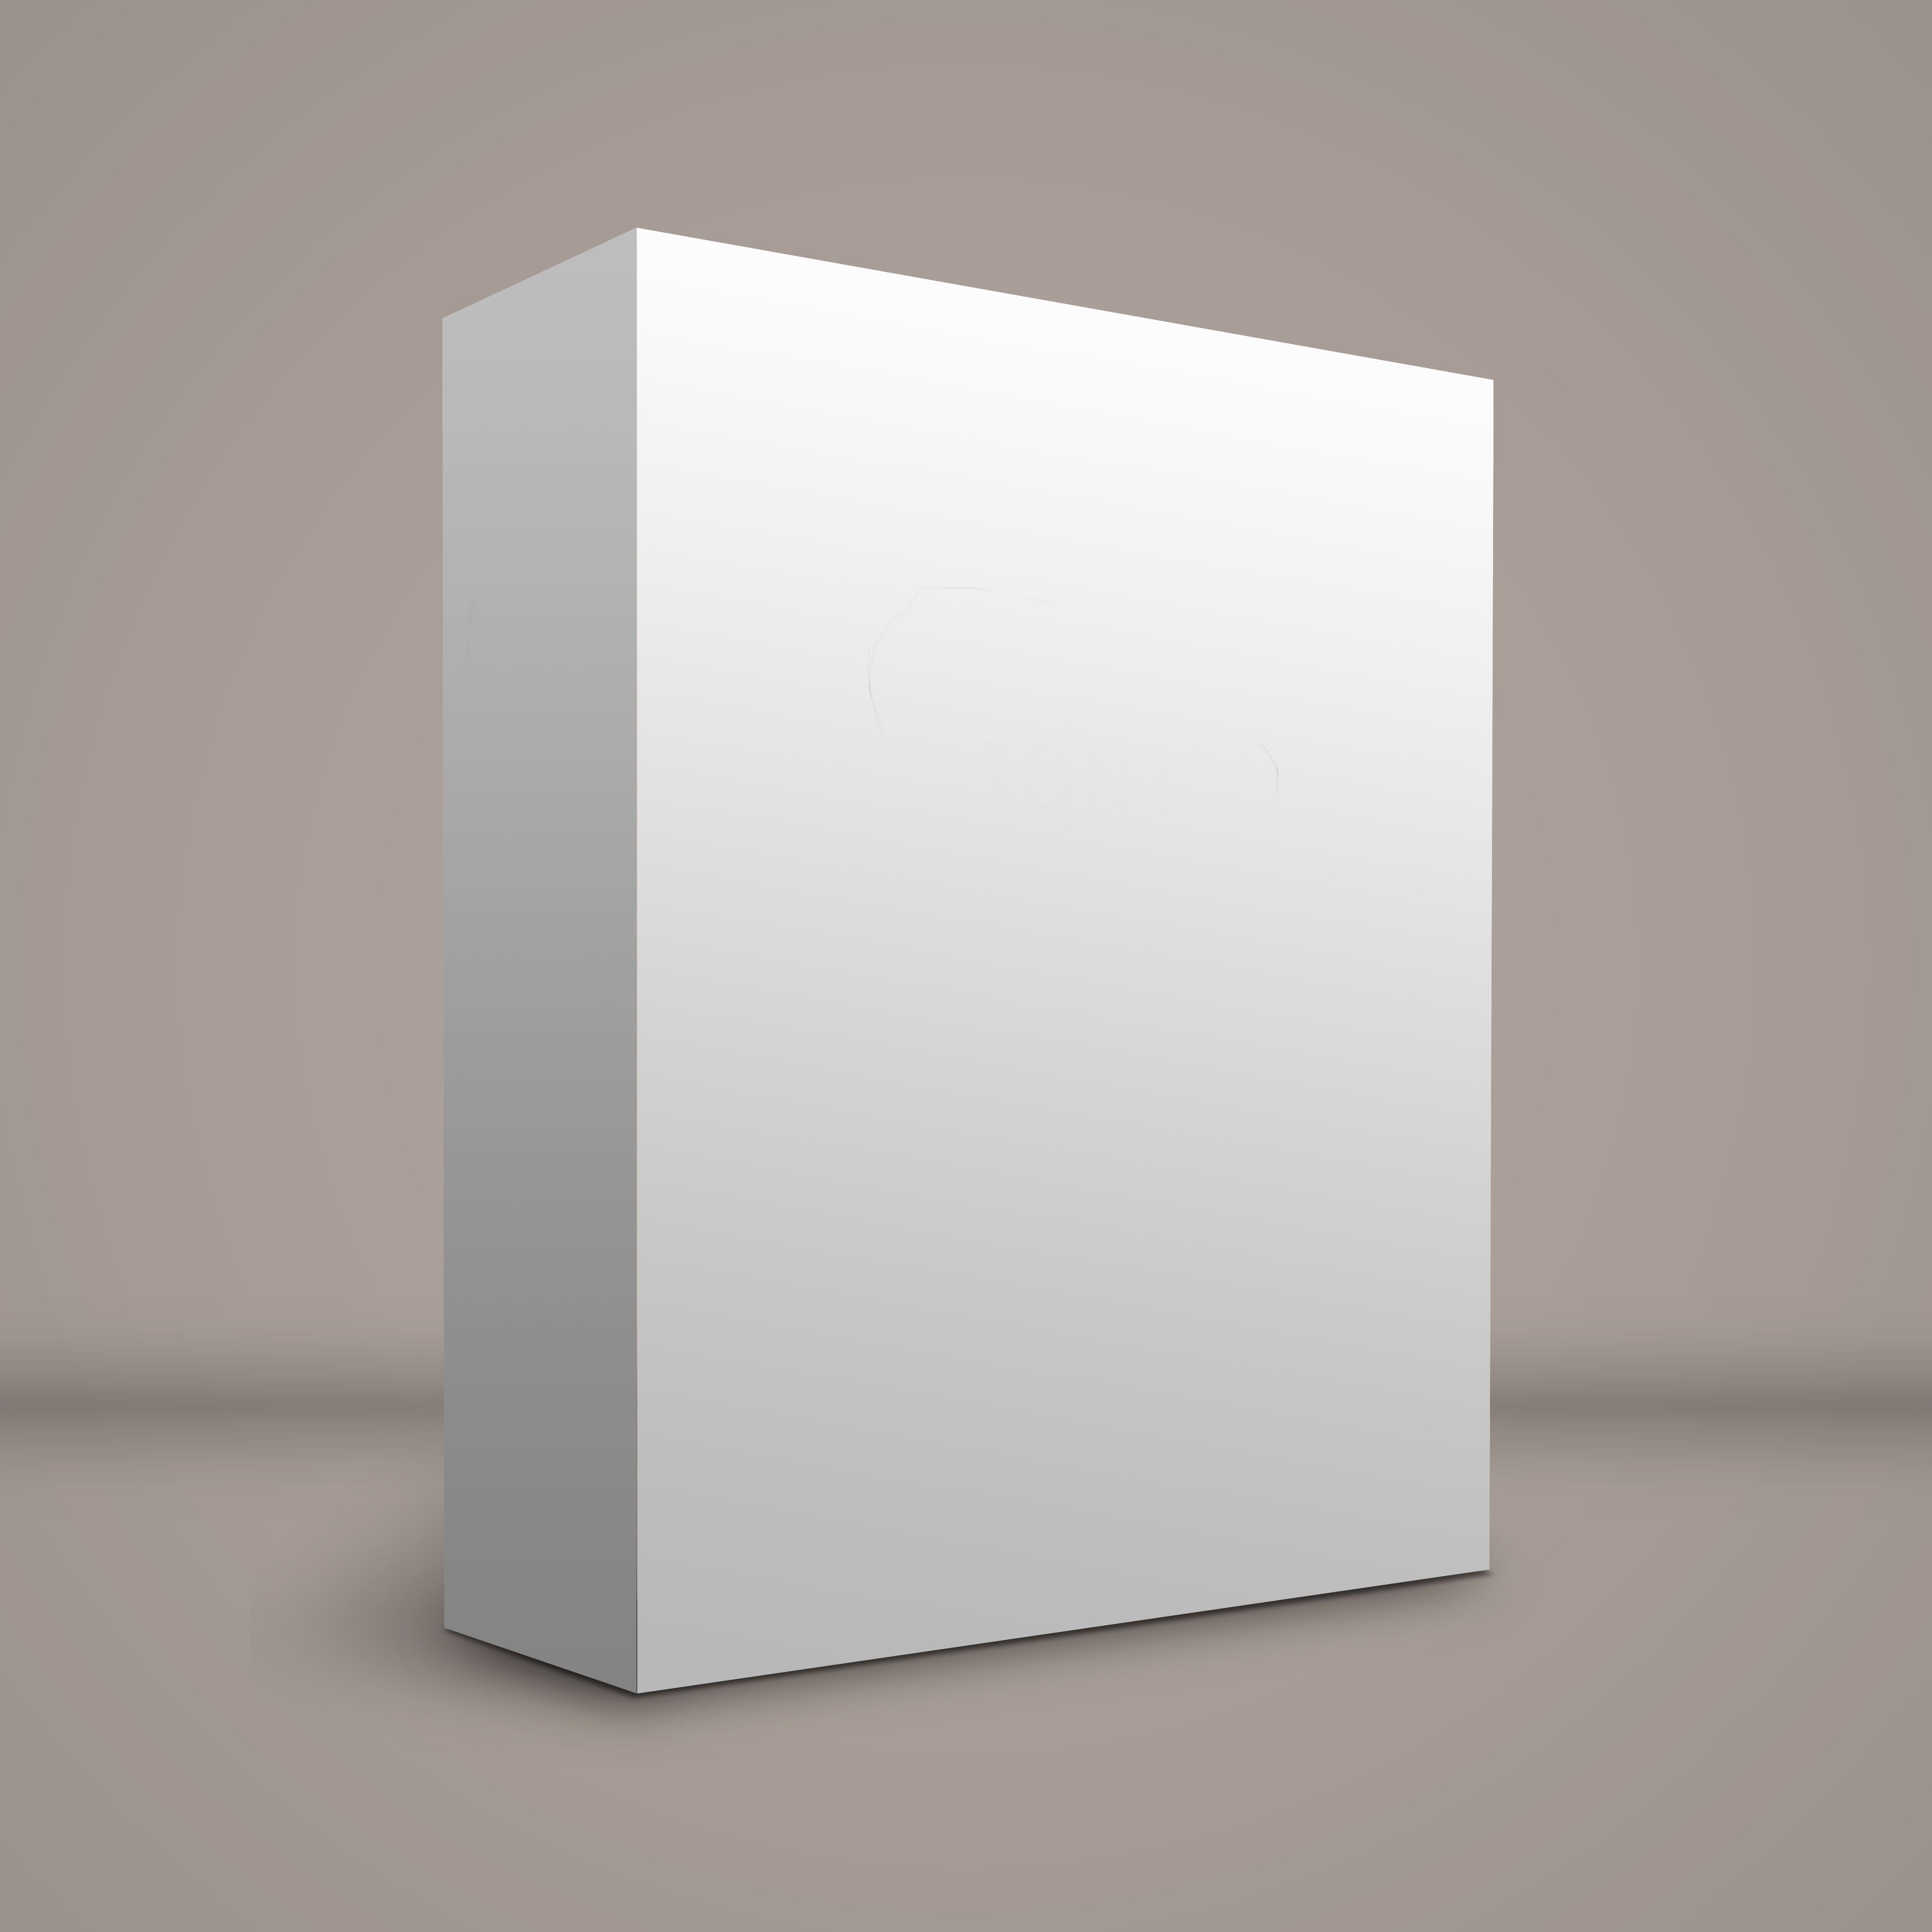 a white box sitting on top of a gray floor